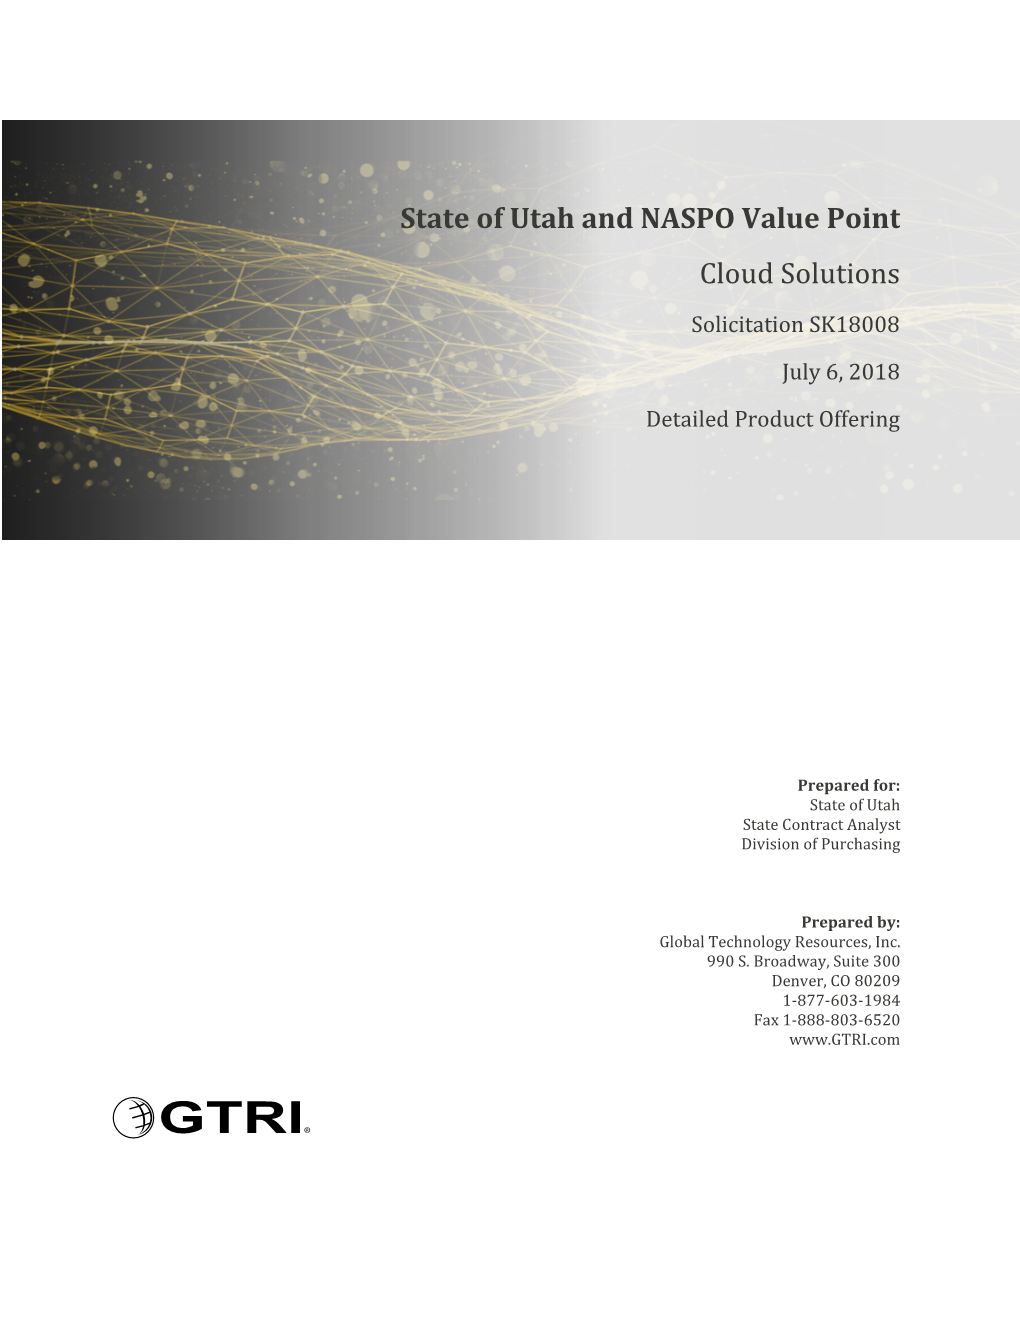 State of Utah and NASPO Value Point Cloud Solutions